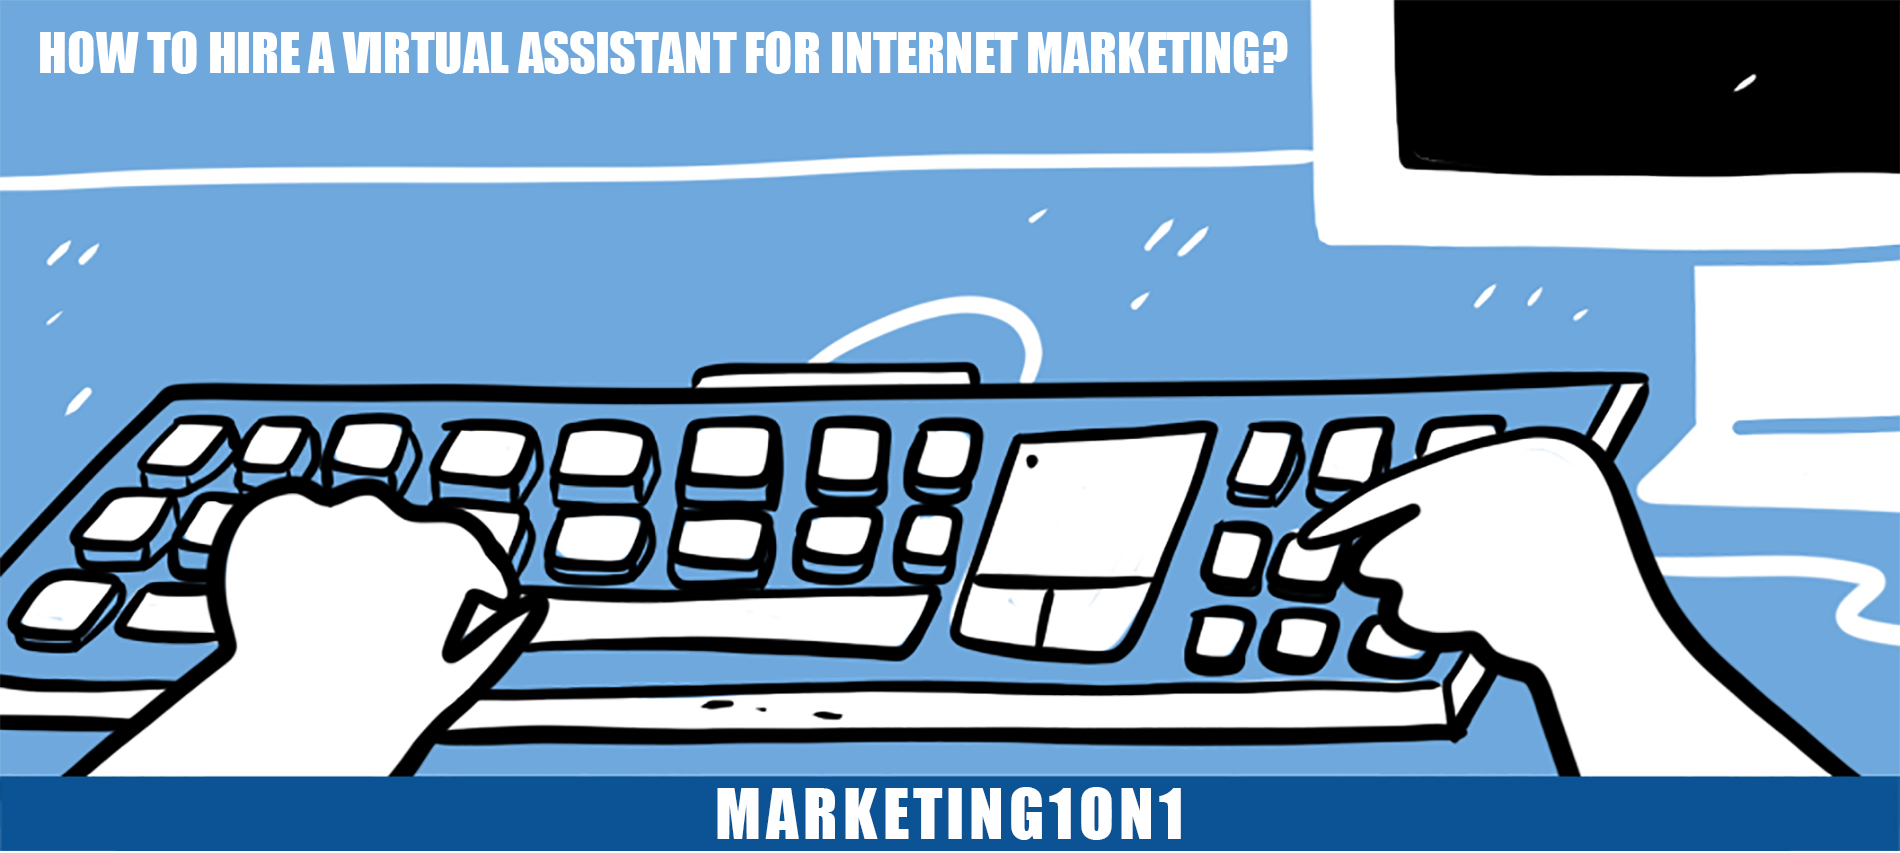 How to hire a virtual assistant for internet marketing?